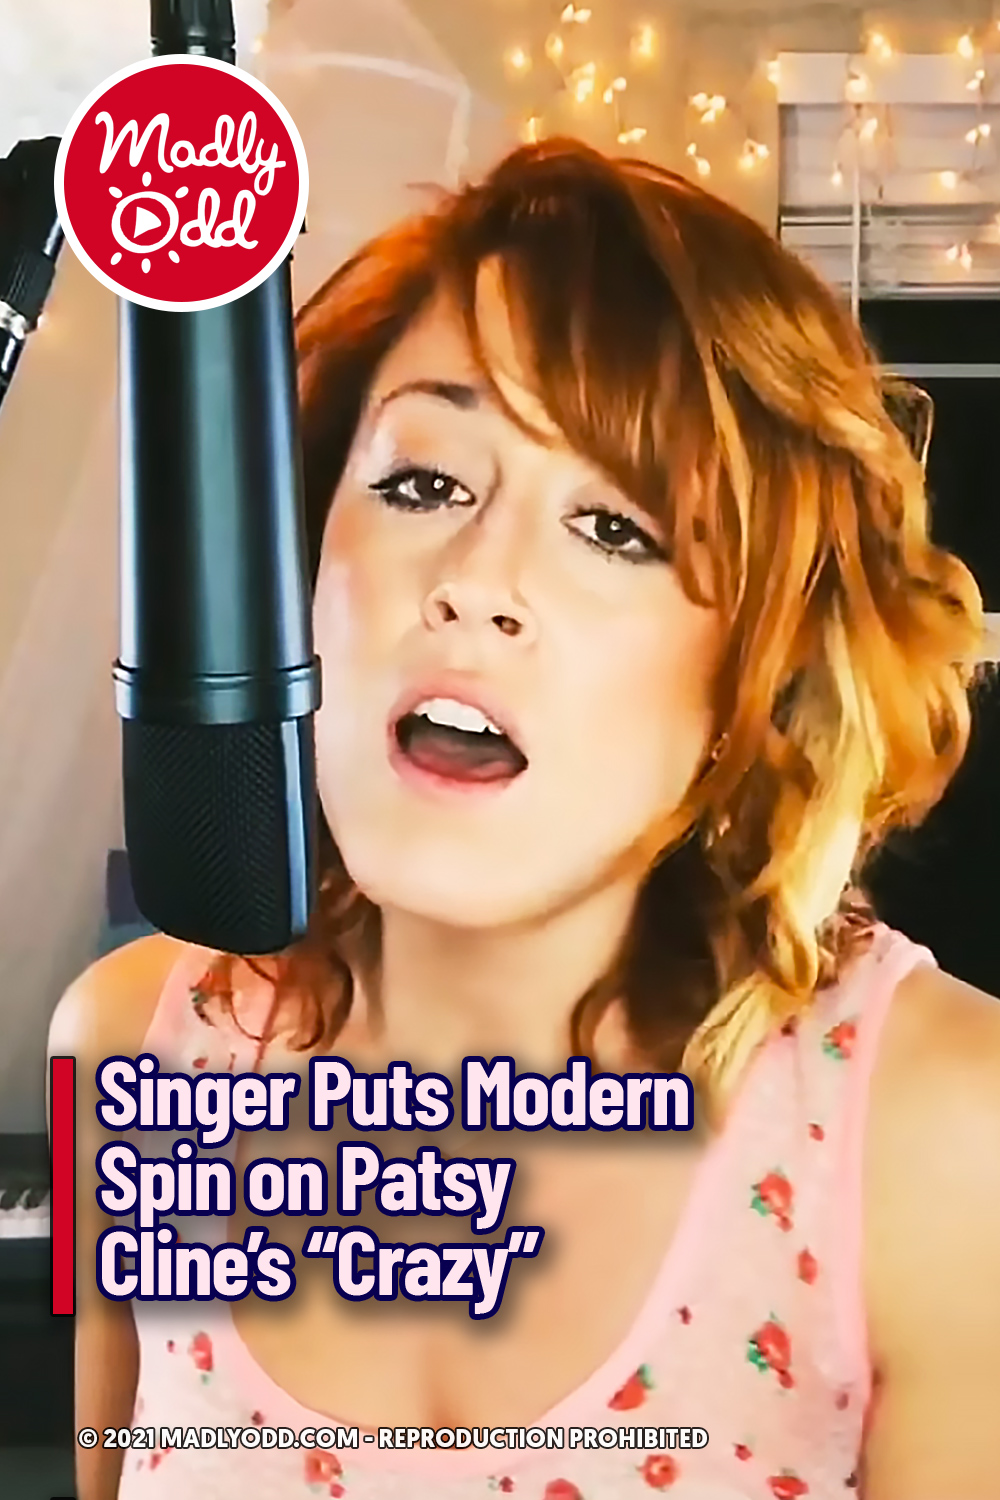 Singer Puts Modern Spin on Patsy Cline’s “Crazy”